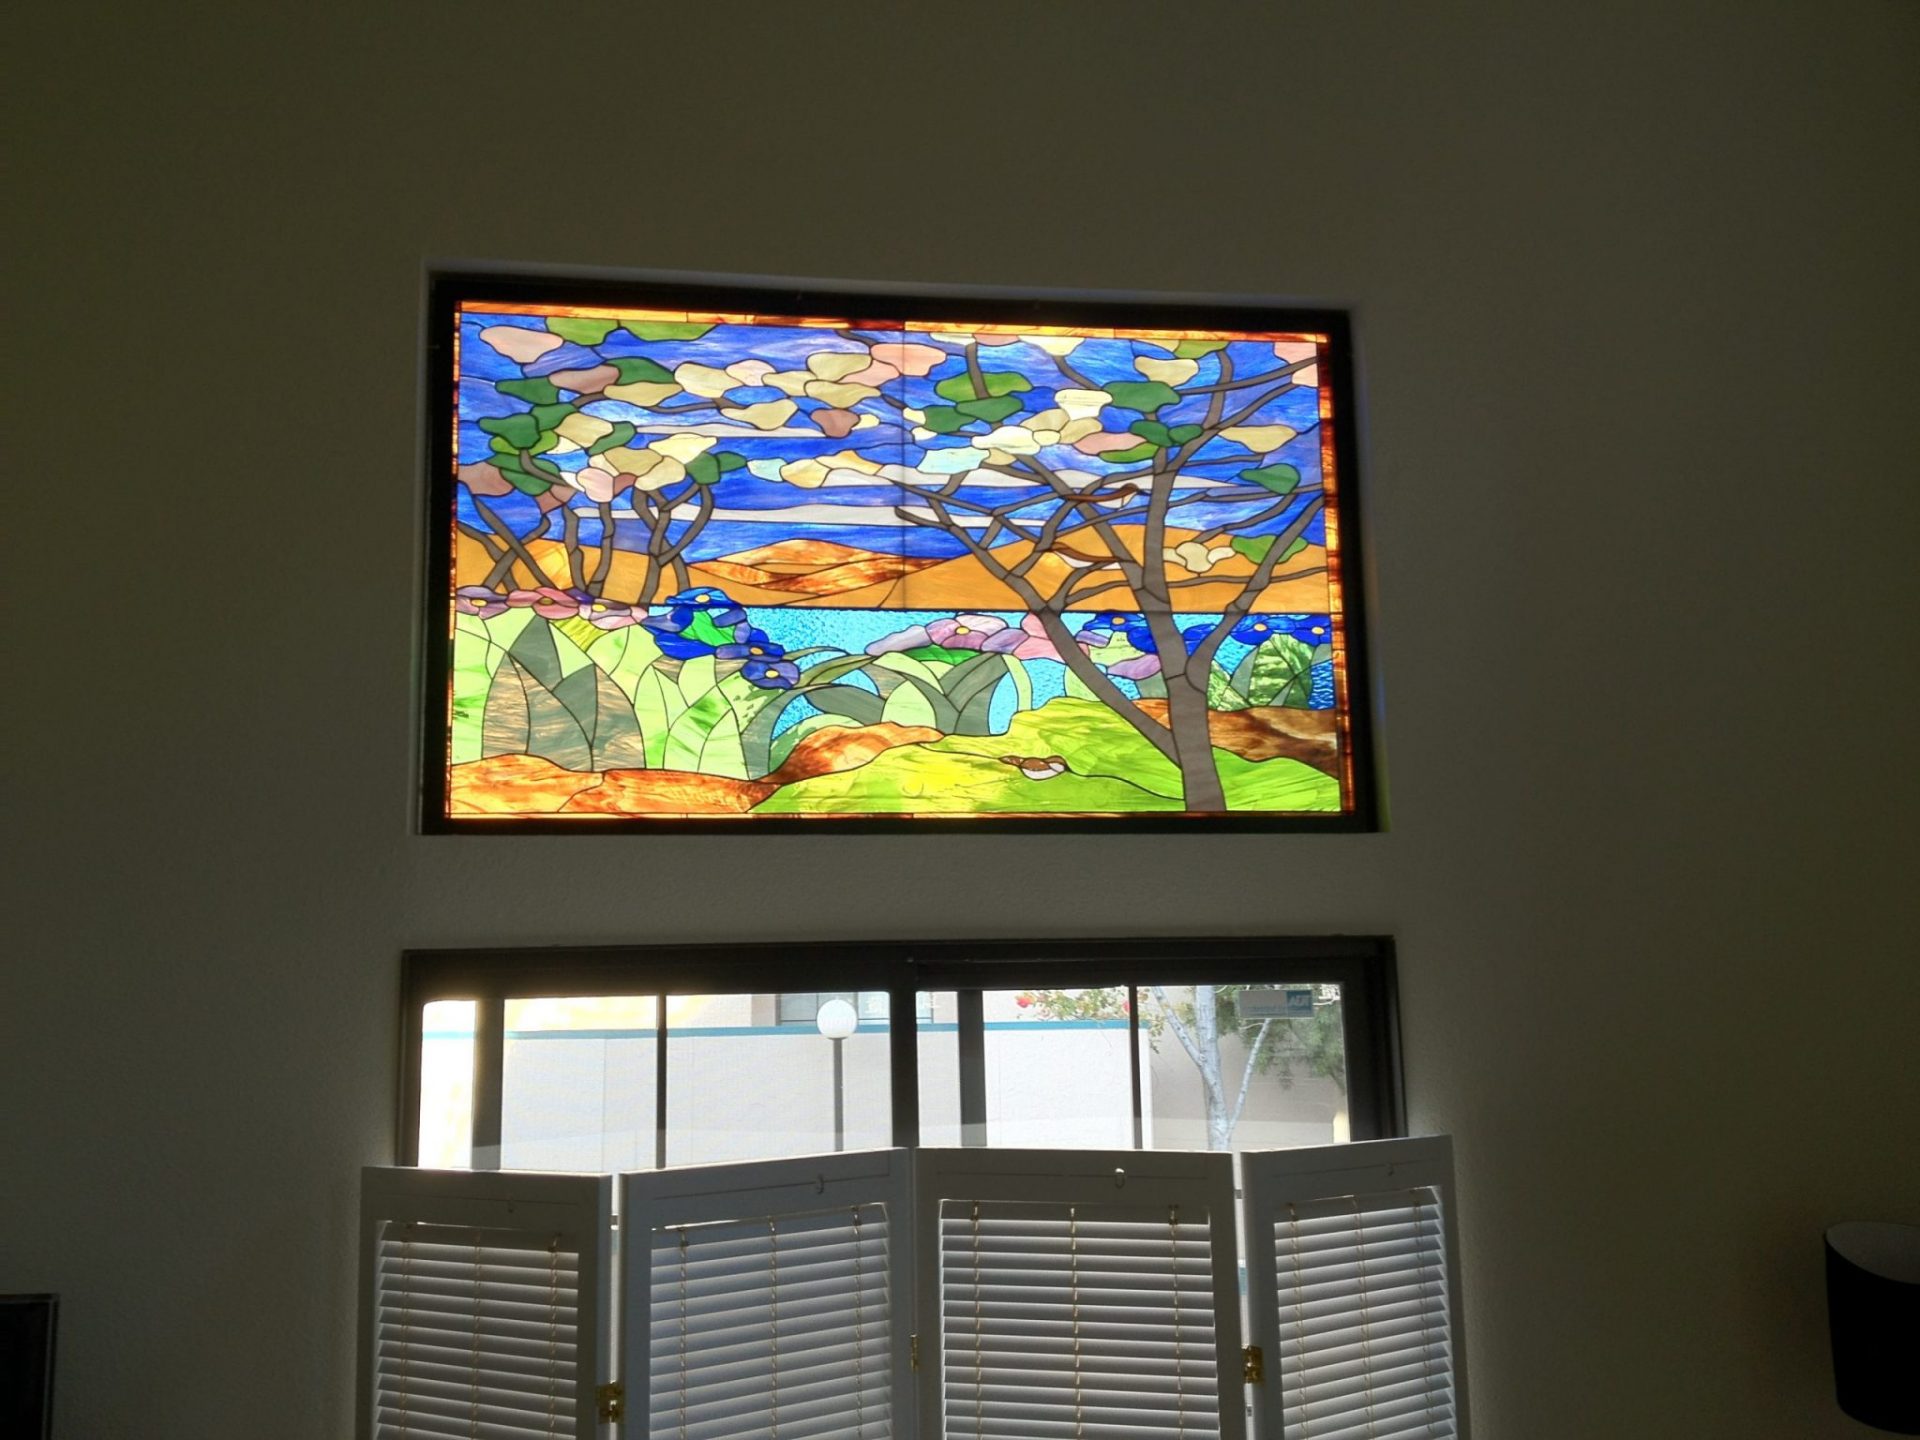 Lovely "Tree Of Life" Stained Glass Accent Window